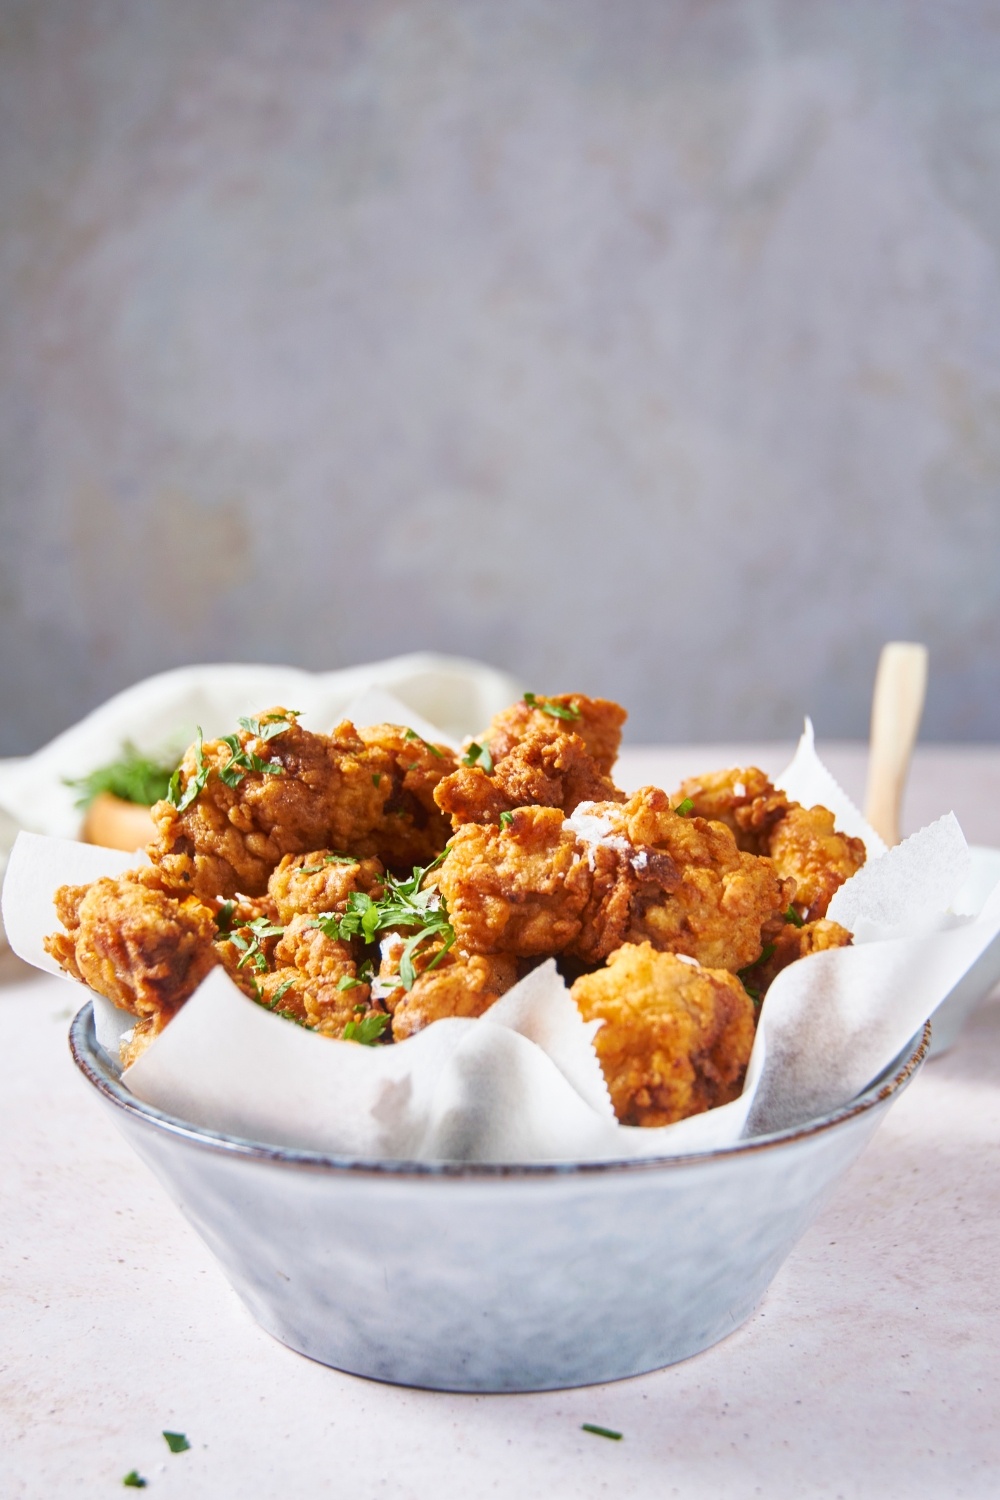 A blue bowl lined with parchment paper and filled with fried chicken pieces that have been garnished with fresh herbs.